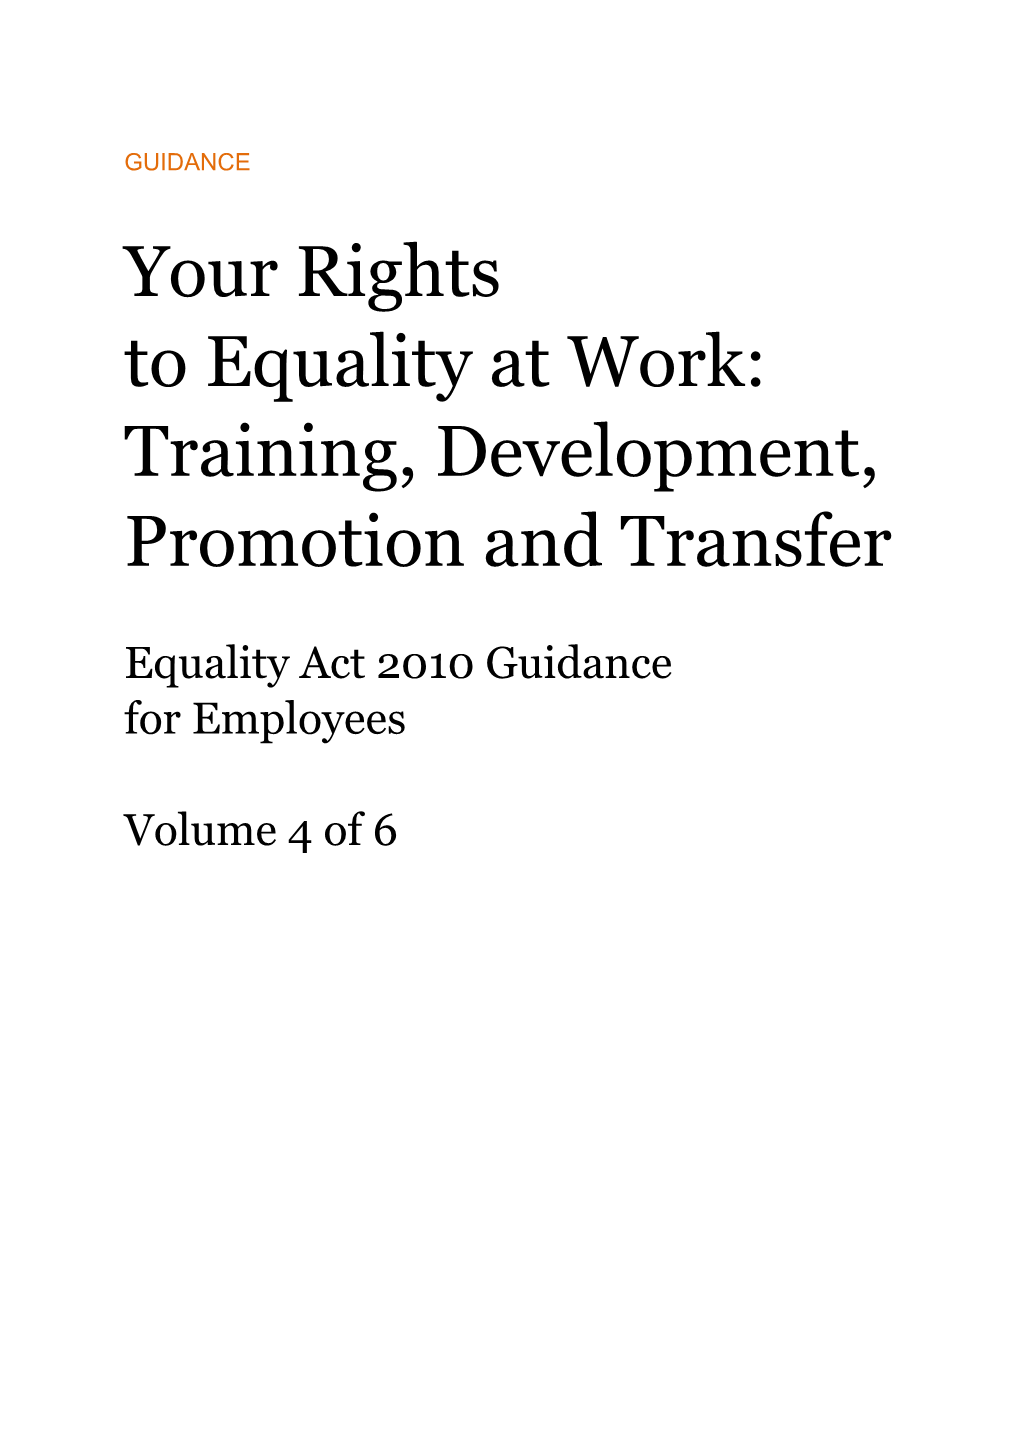 Your Rights to Equality at Work: Training, Development, Promotion and Transfer